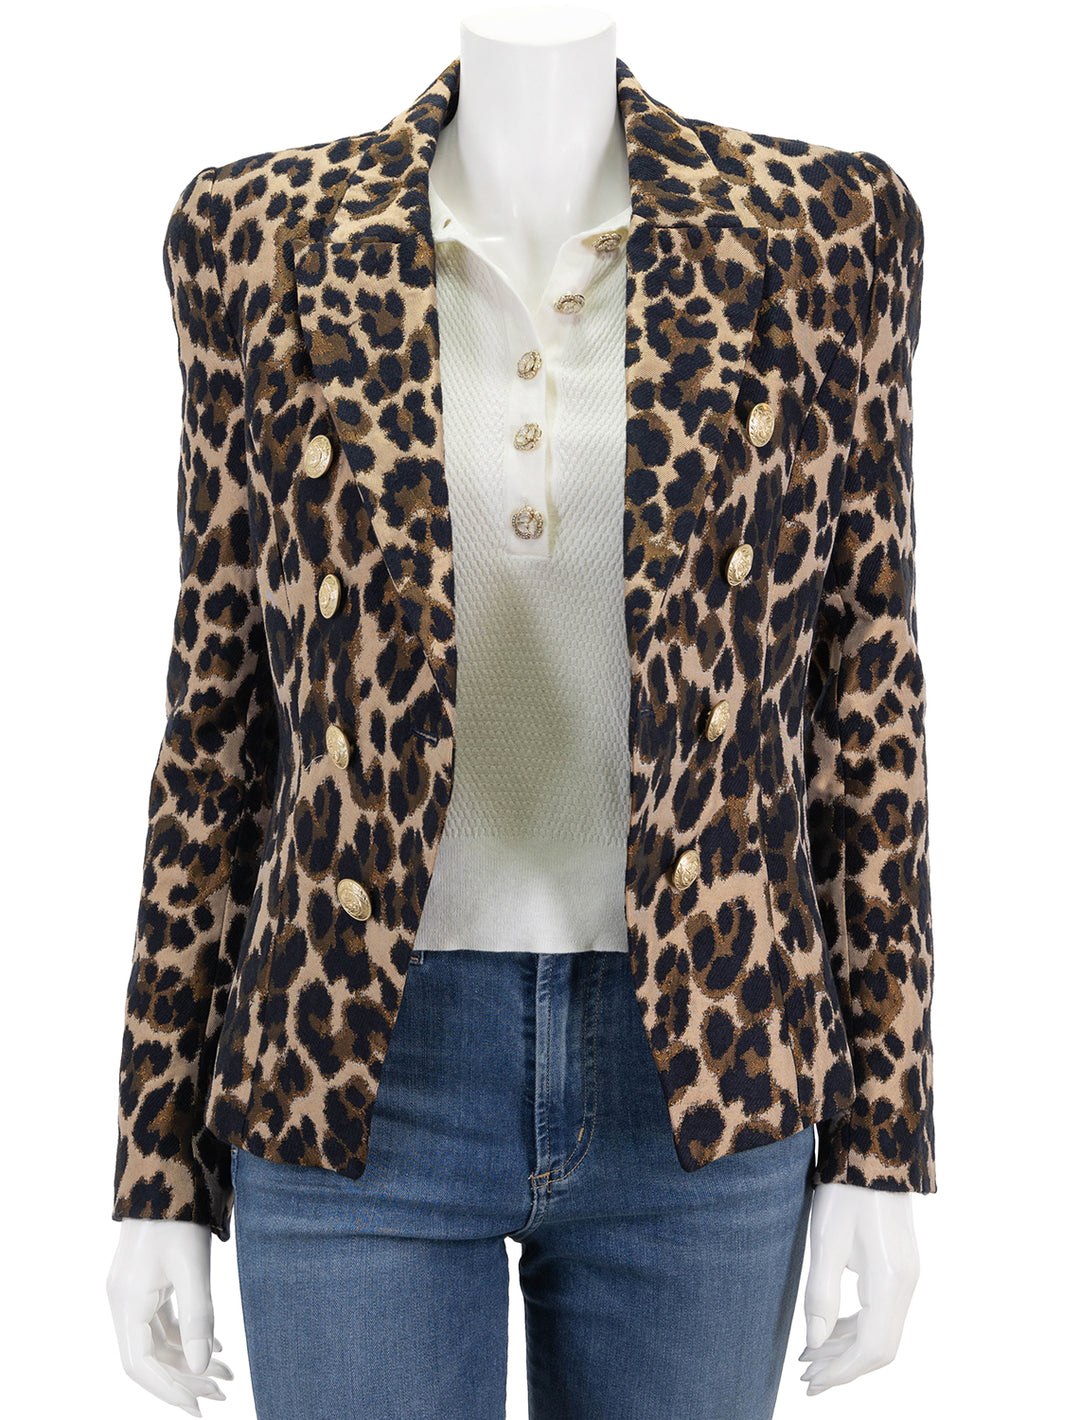 Front view of L'agence's bethany structured blazer in cashew leopard jacquard.